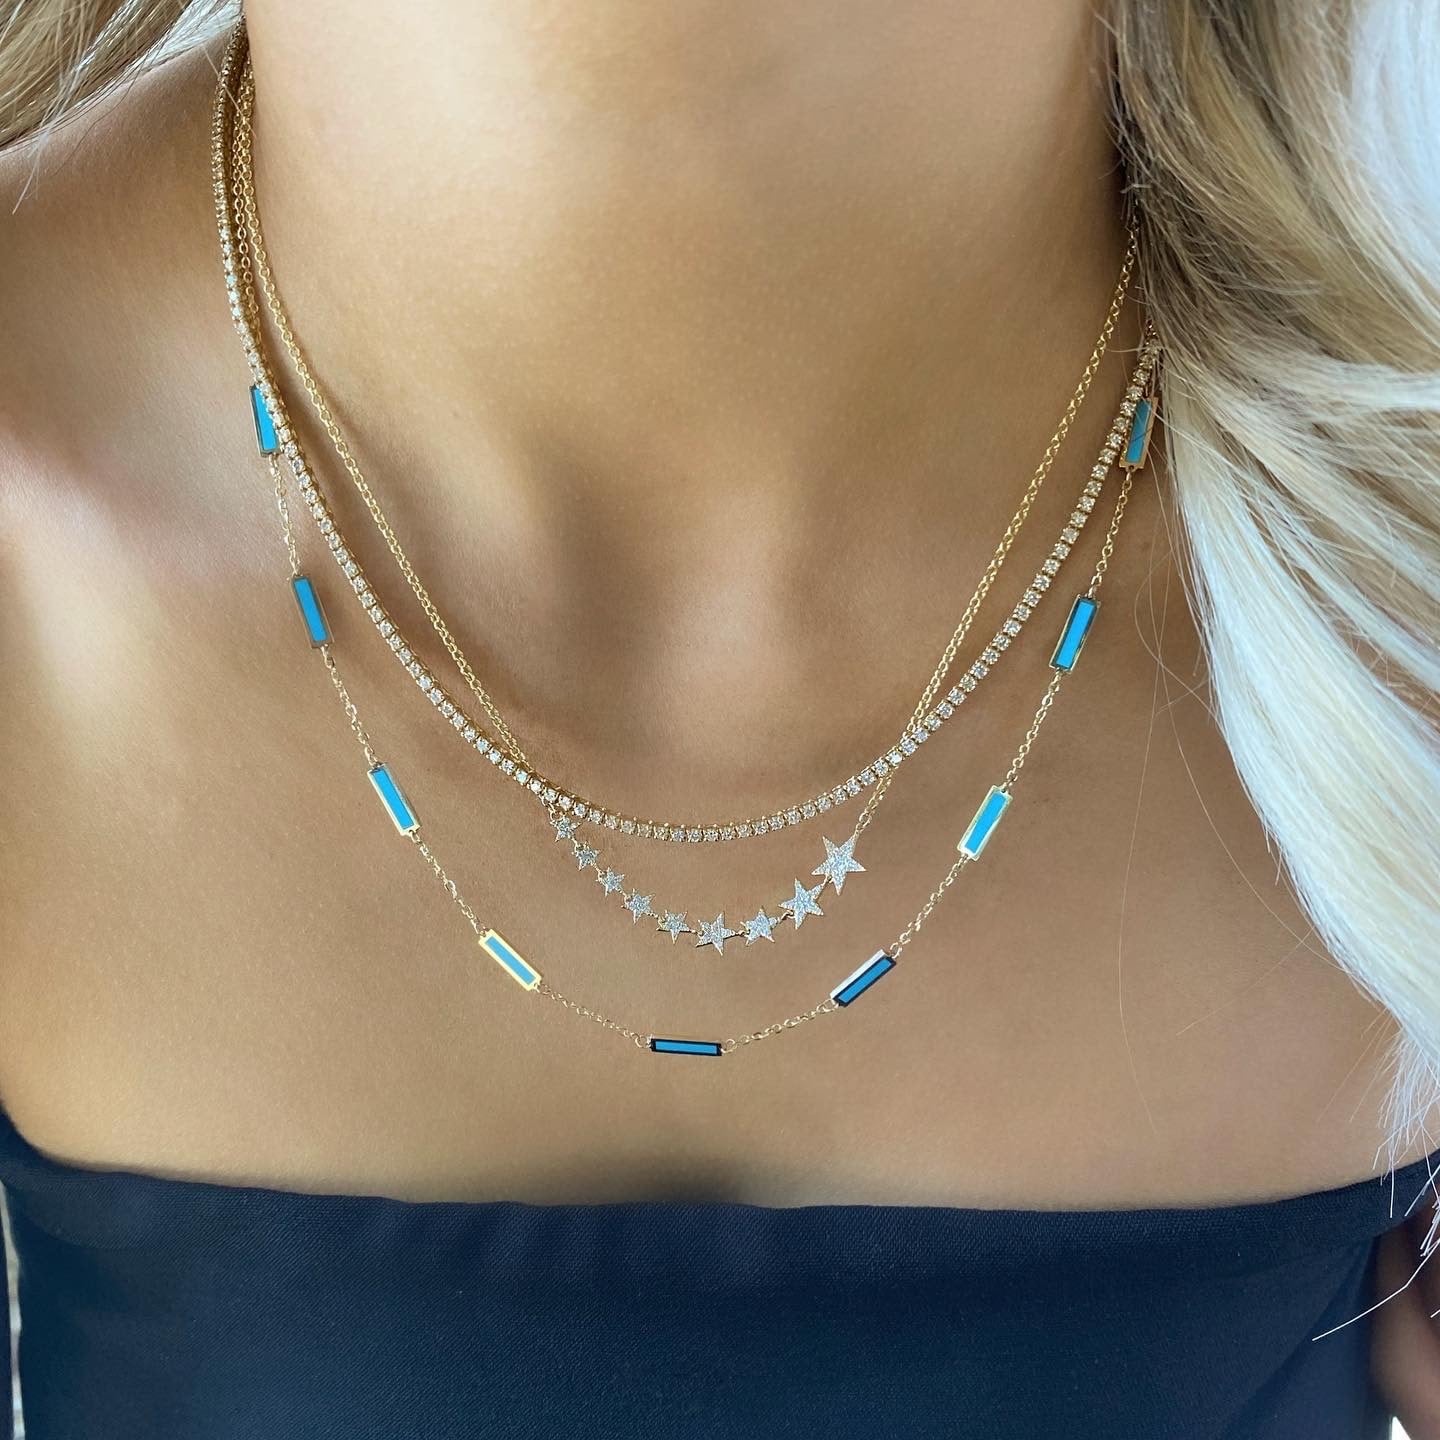 Turquoise Bar Station Necklace